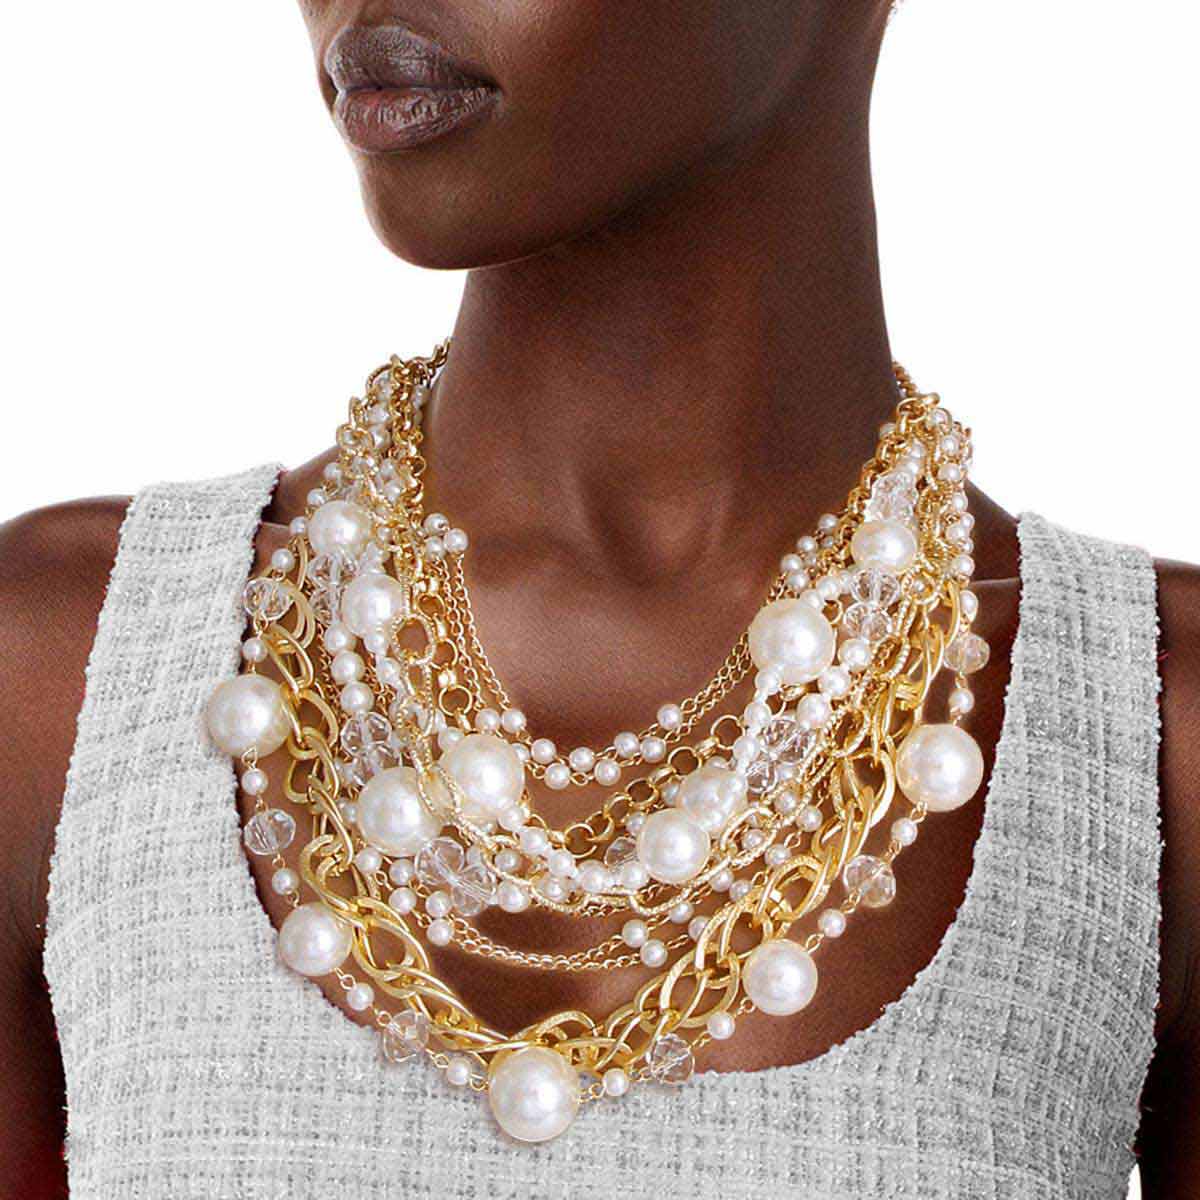 Pearls, Beads, and Gold Chains Necklace Set